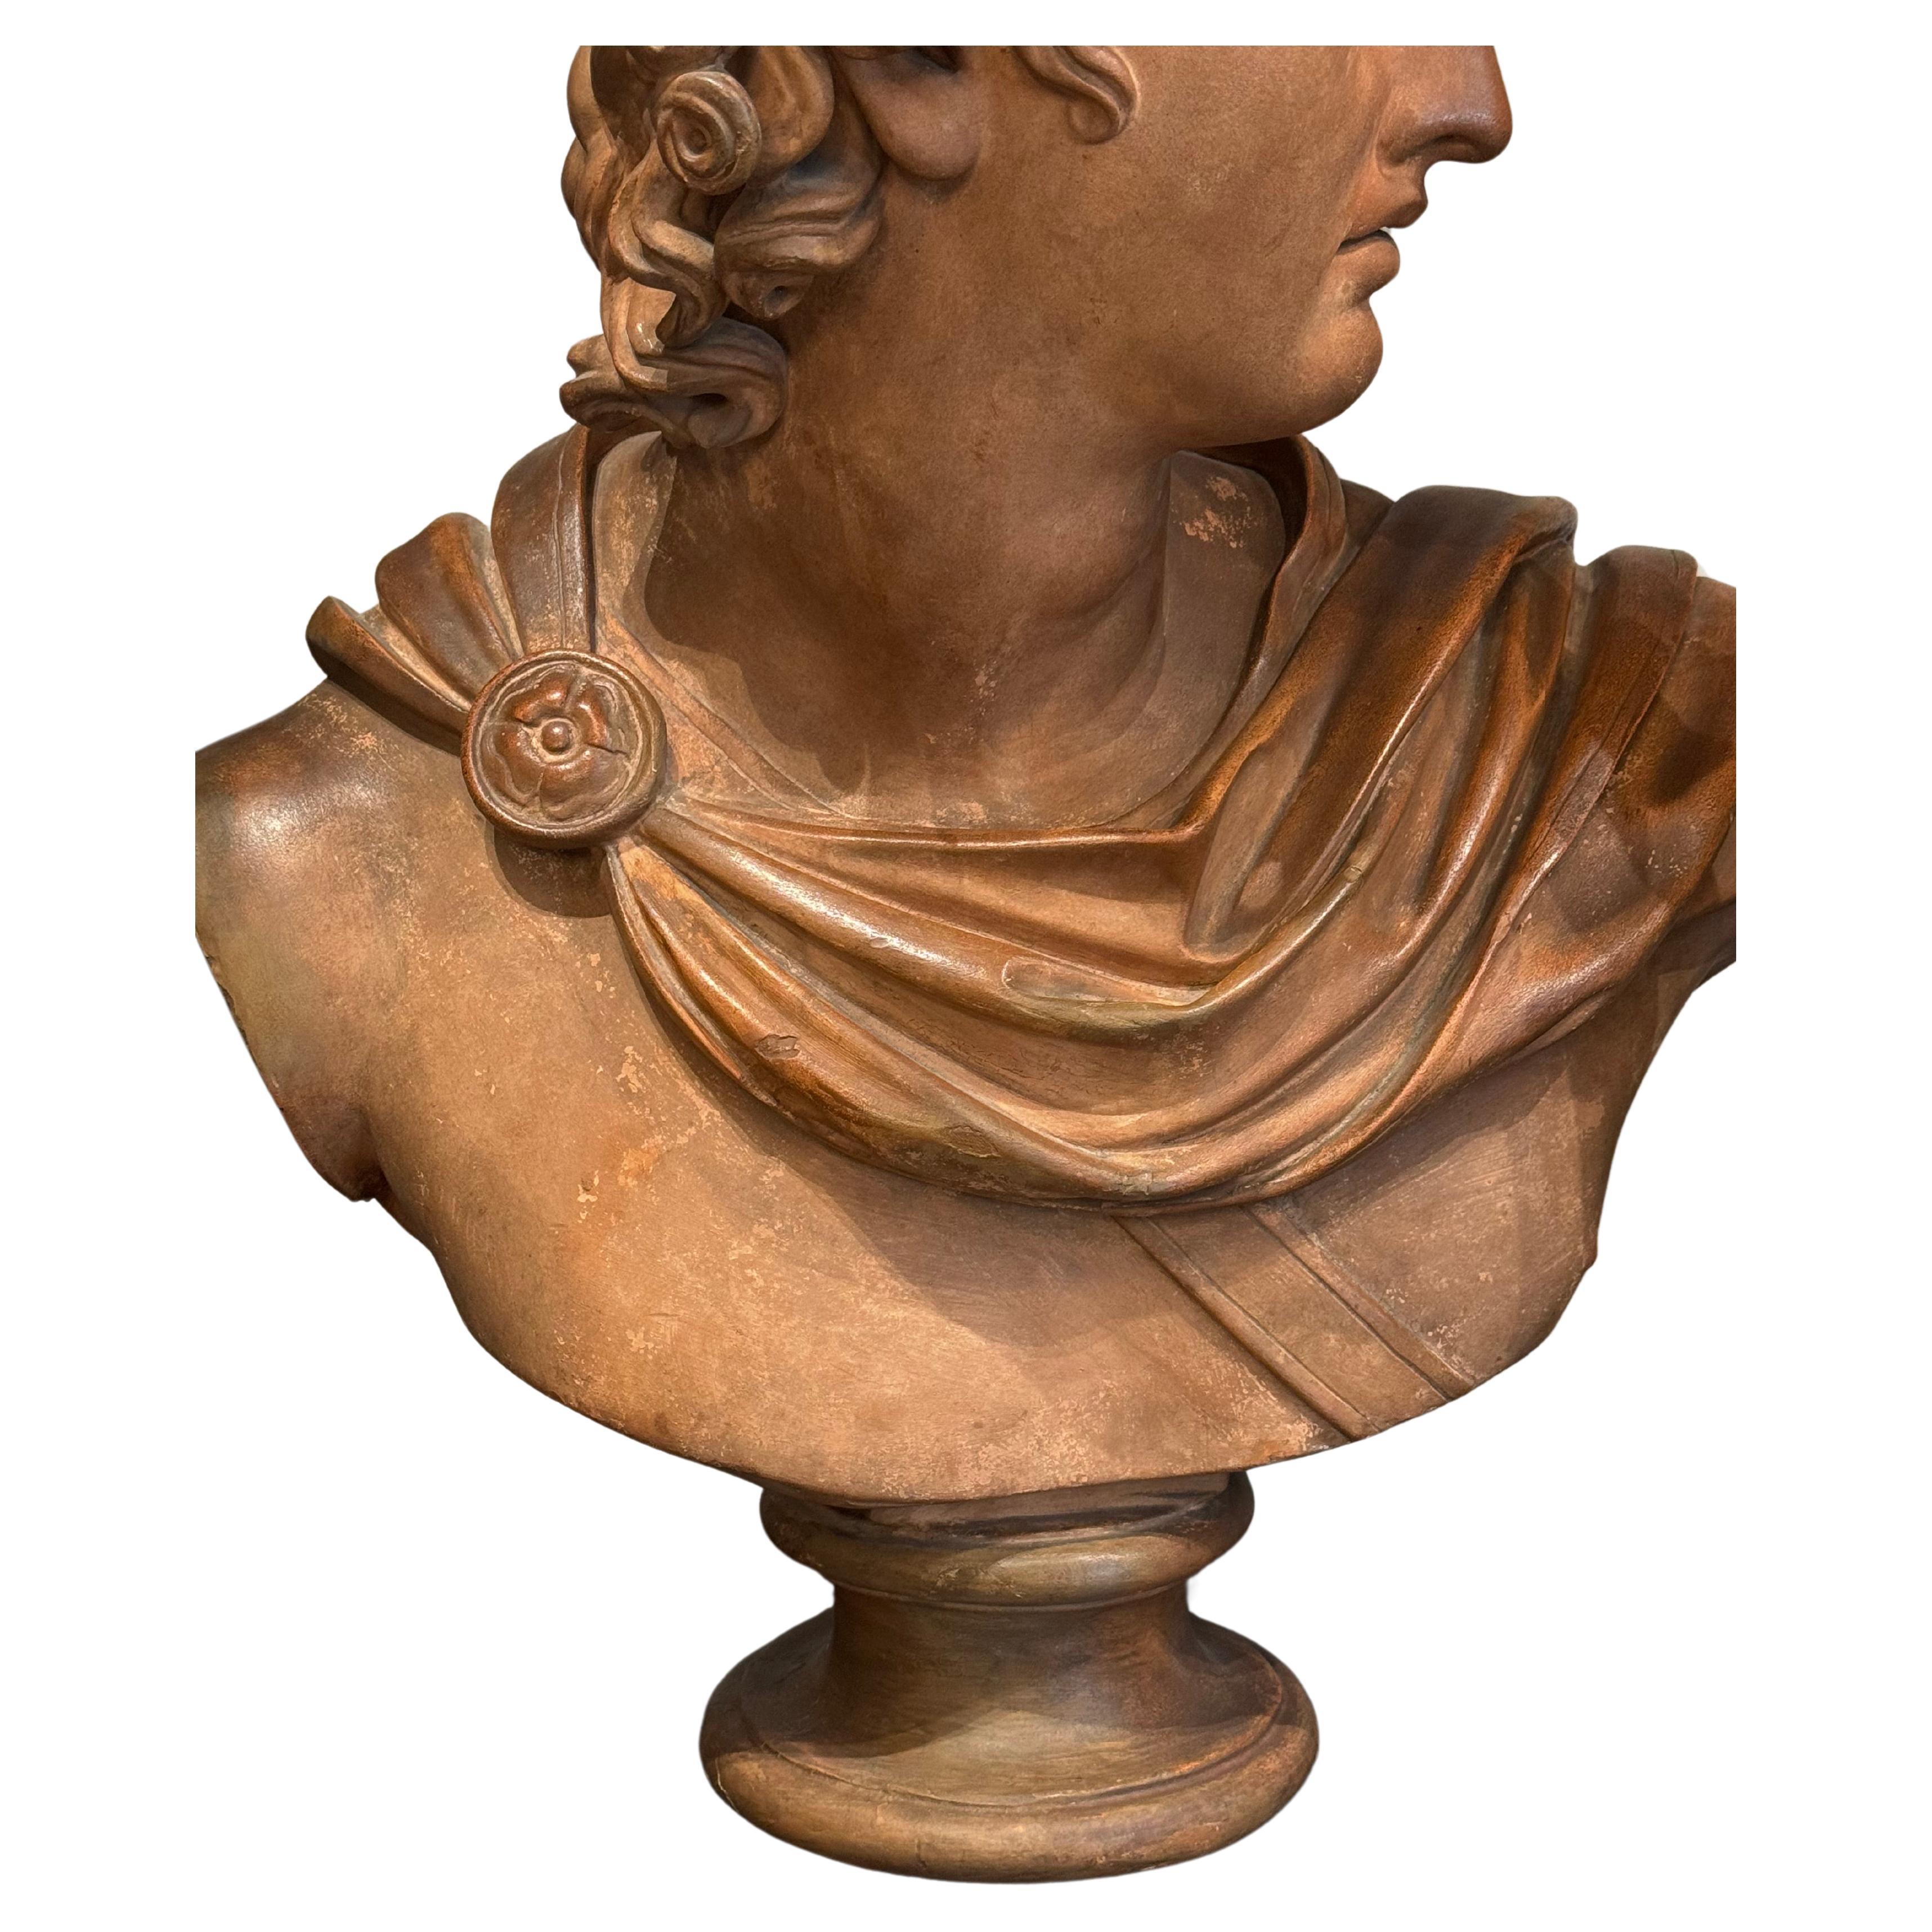 Italianate Terracotta Male Bust, Circa 1870
Sourced from Italy by Martyn Lawrence Bullard
Hand craved, and fitted with adjoining terracotta mount

